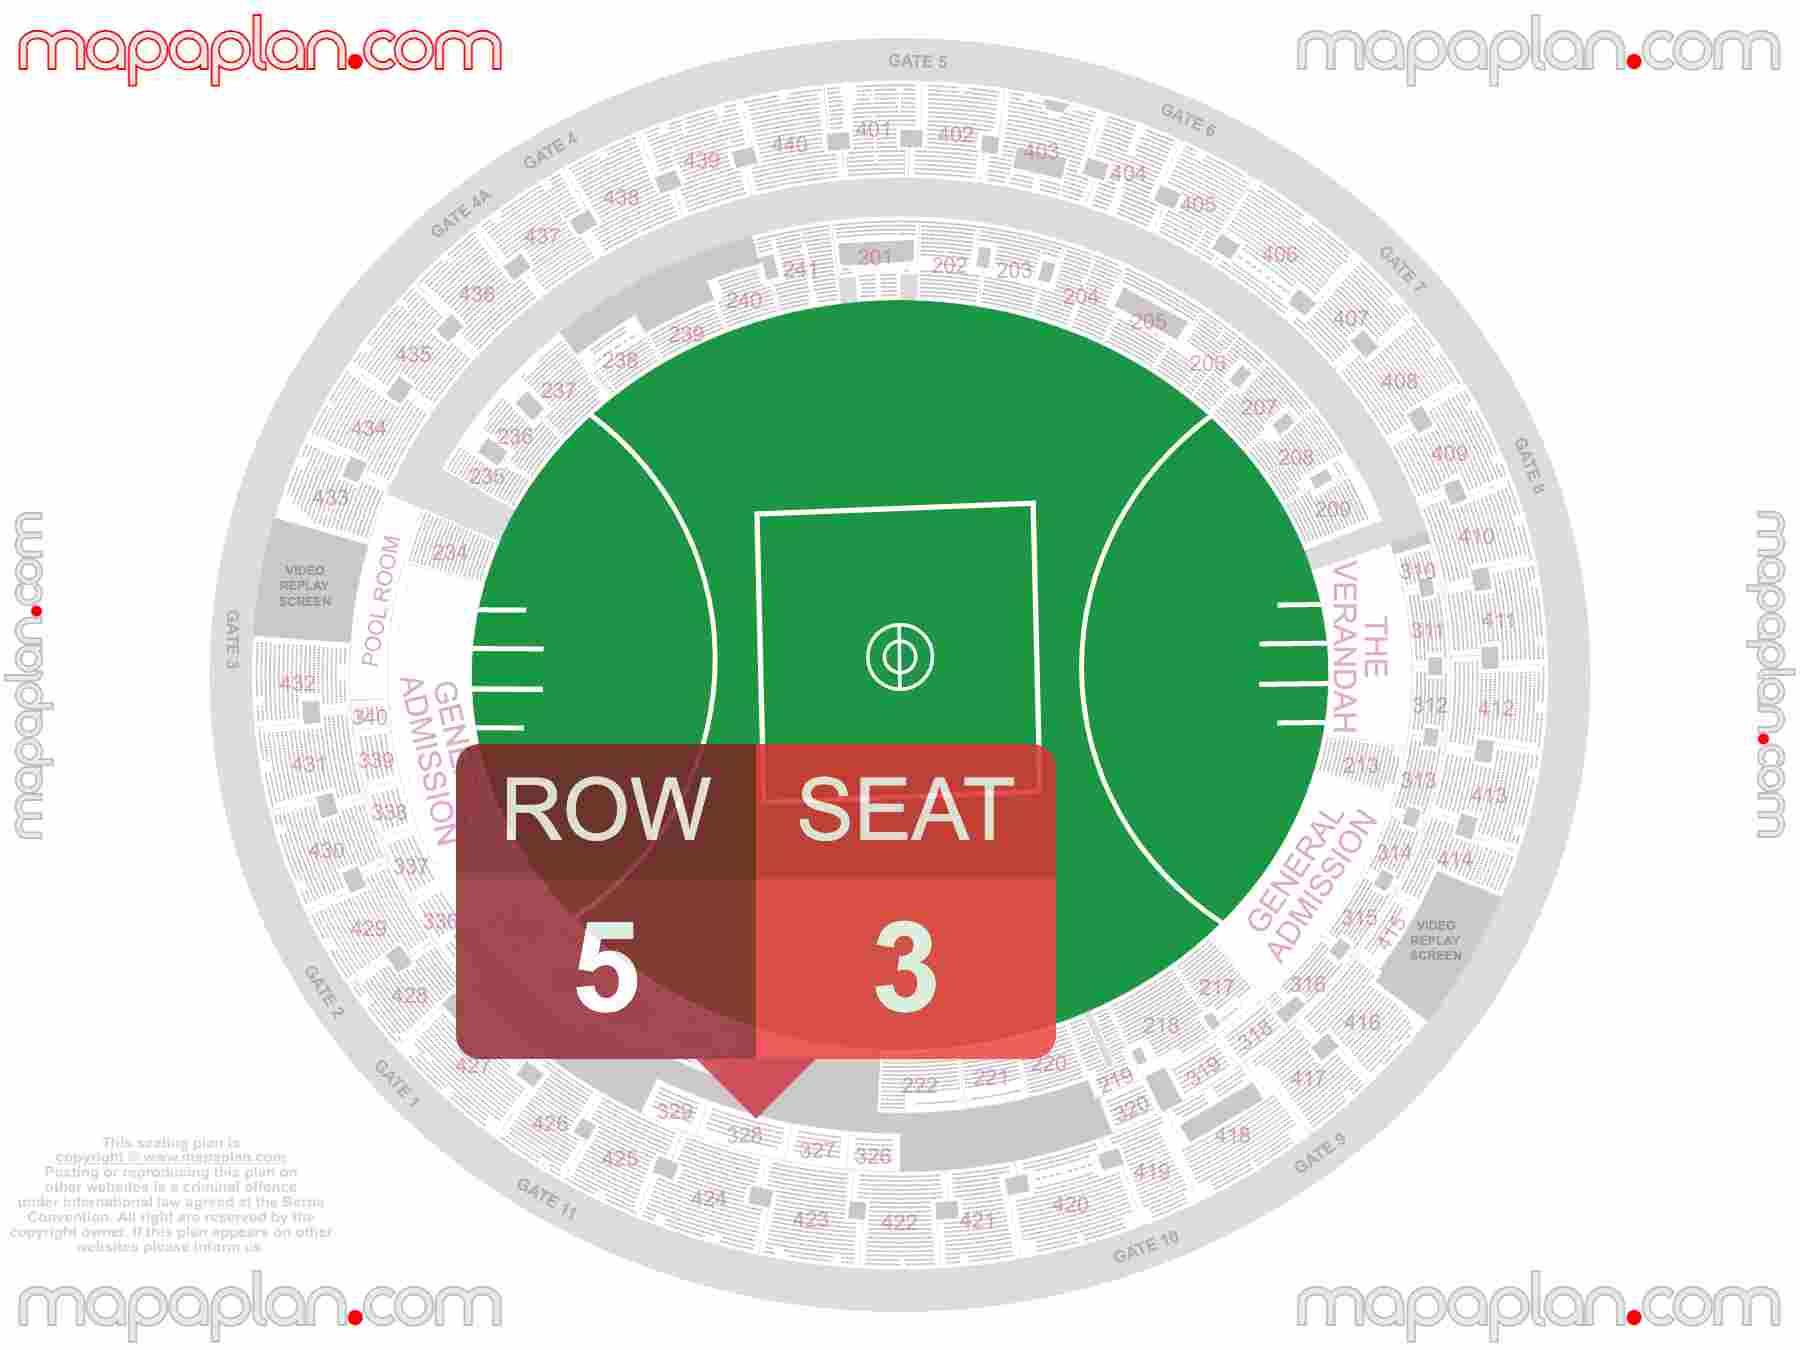 Brisbane Gabba Cricket Ground seating map Football, cricket, rugby, concert detailed seat numbers and row numbering map with interactive map plan layout